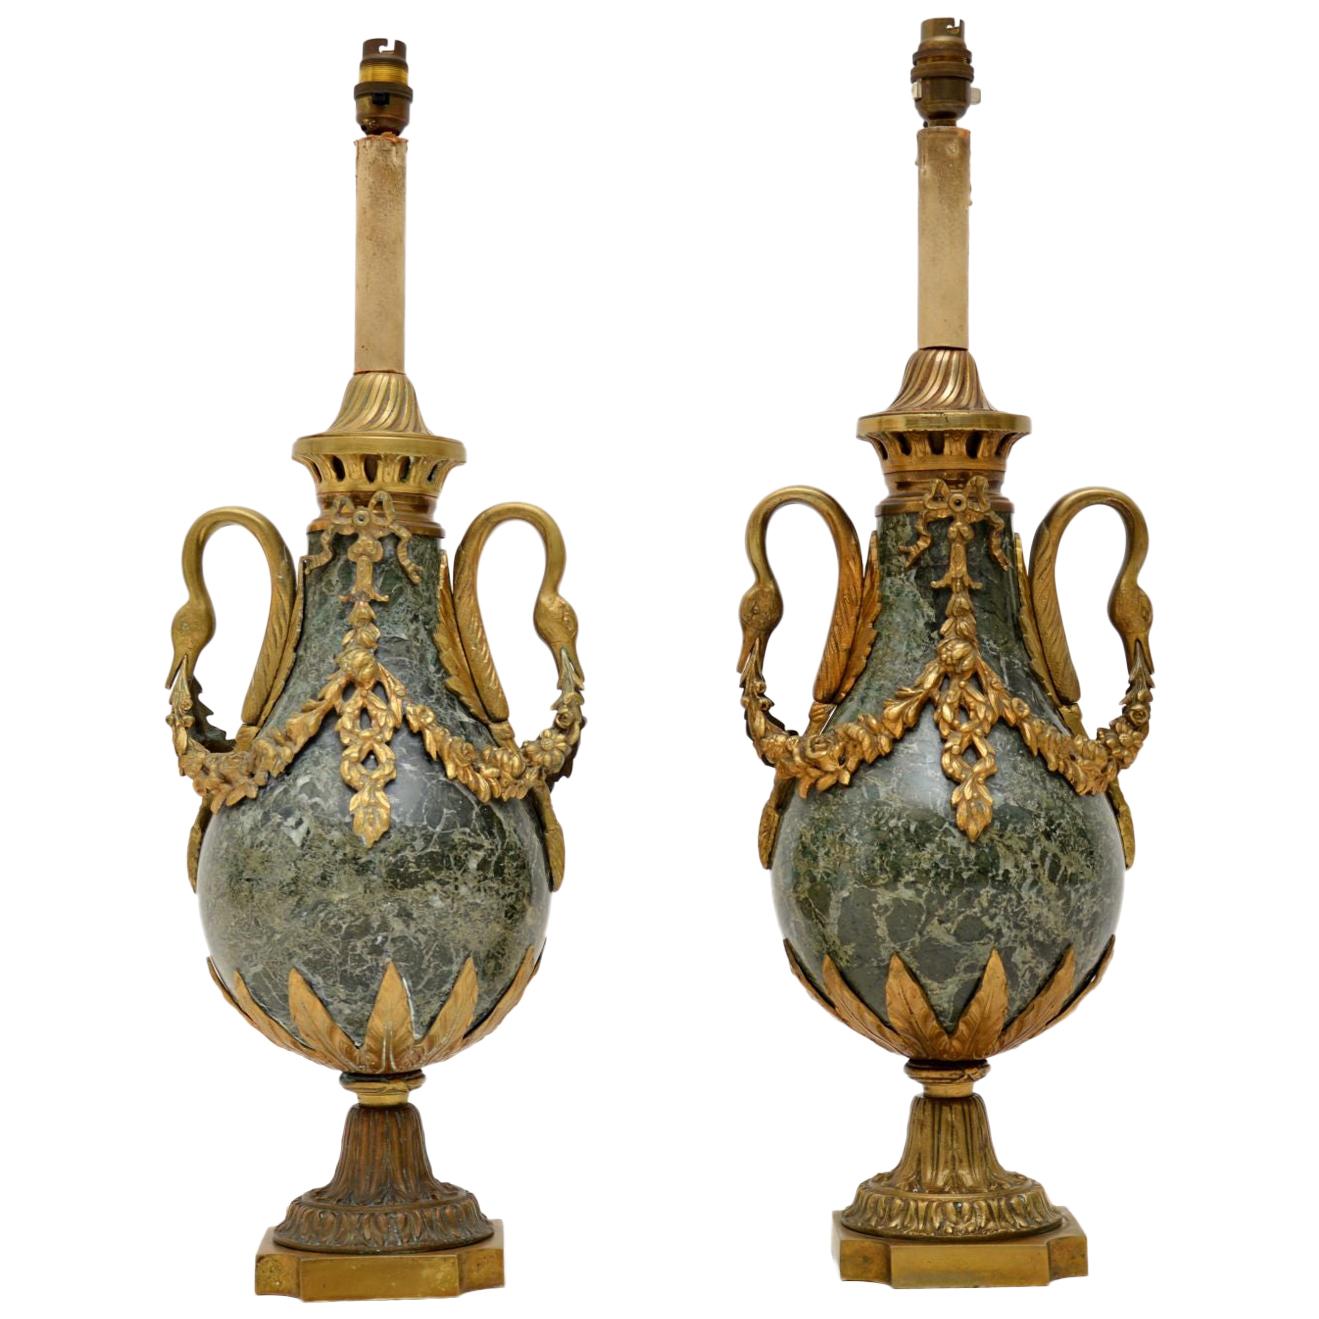 Very large impressive pair of French antique marble and gilt bronze table lamps in working order, because they have just been re-wired. They are in excellent condition and the gilt bronze is very finely detailed. Not sure of the exact age of these